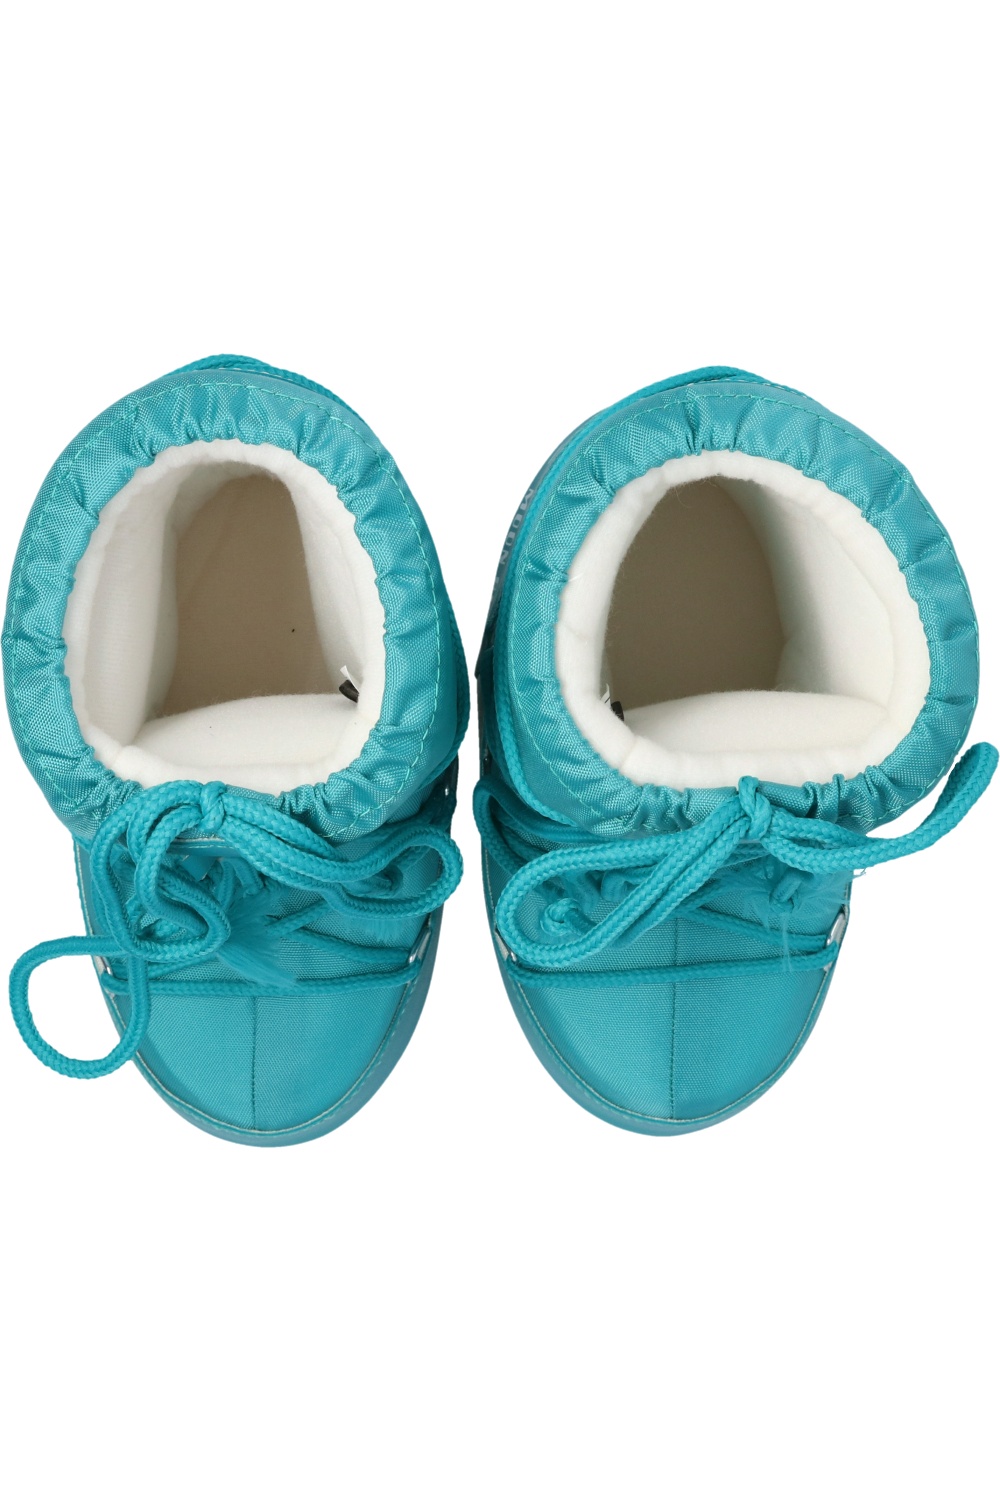 Moon Boots Kids & Baby Shoes